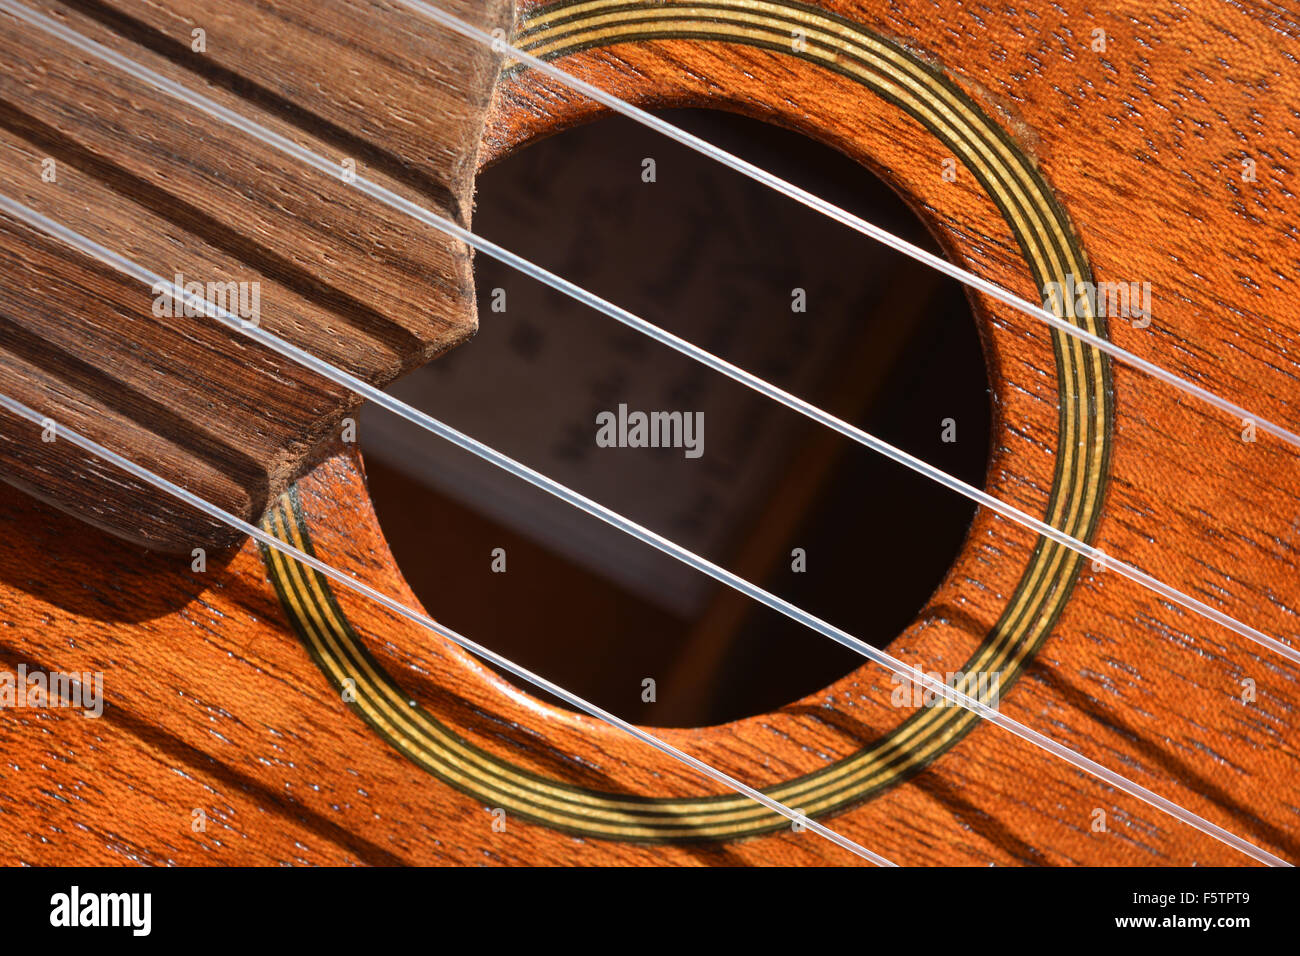 Detail of fluorocarbon strings over sound hole and rosette on a soprano  ukulele Stock Photo - Alamy